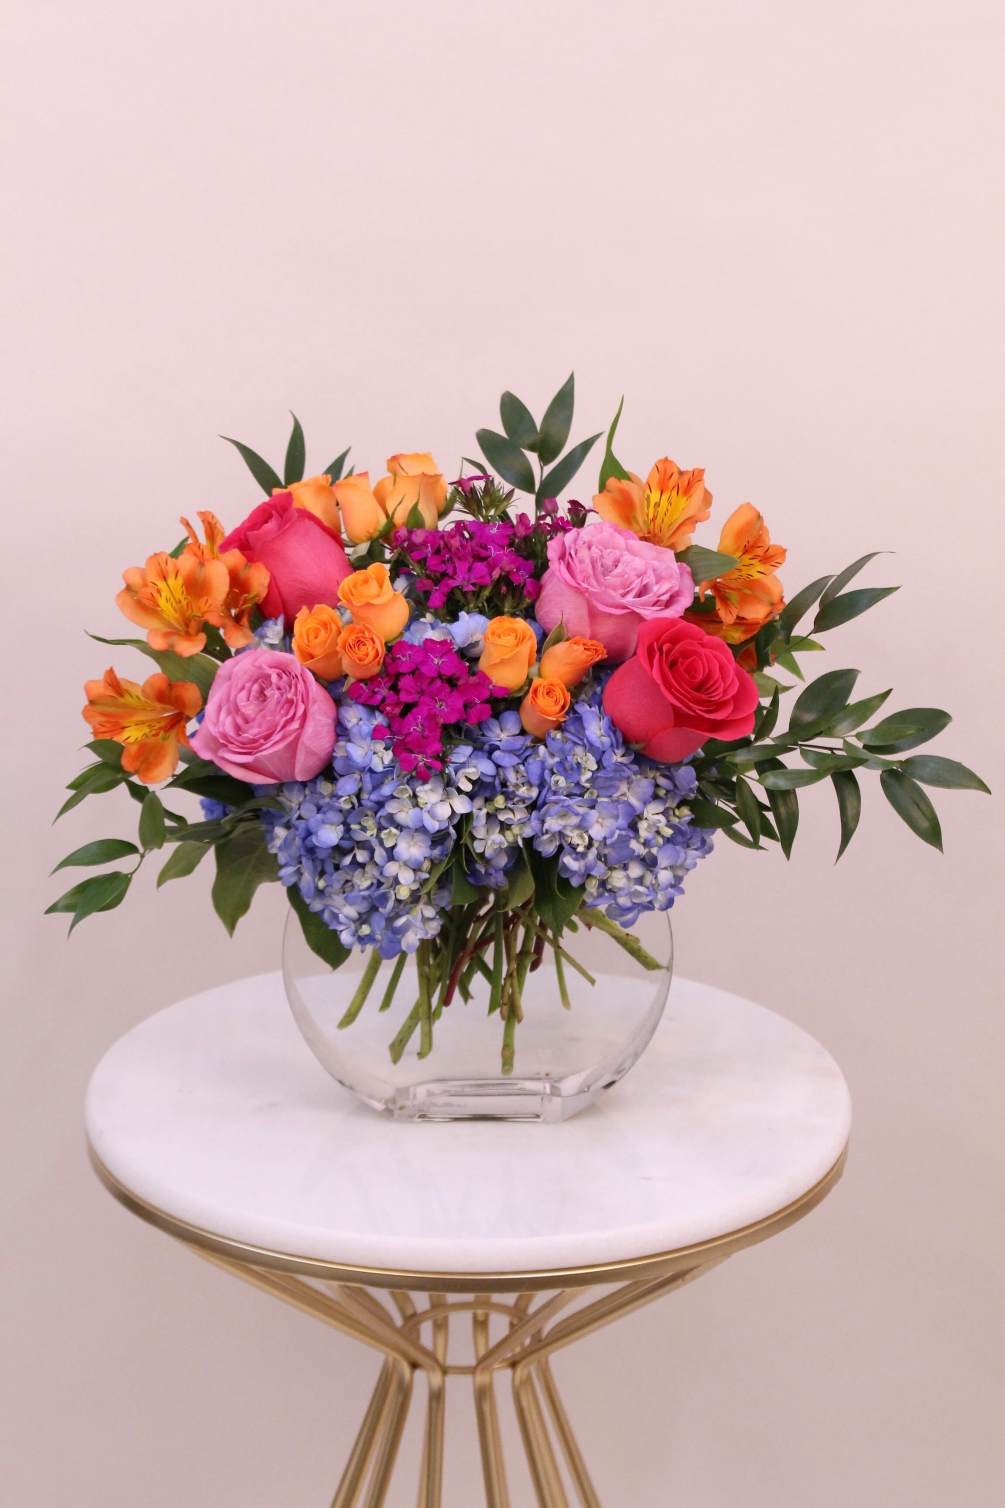 An arrangement of vibrant spring flowers arranged in a square moon glass